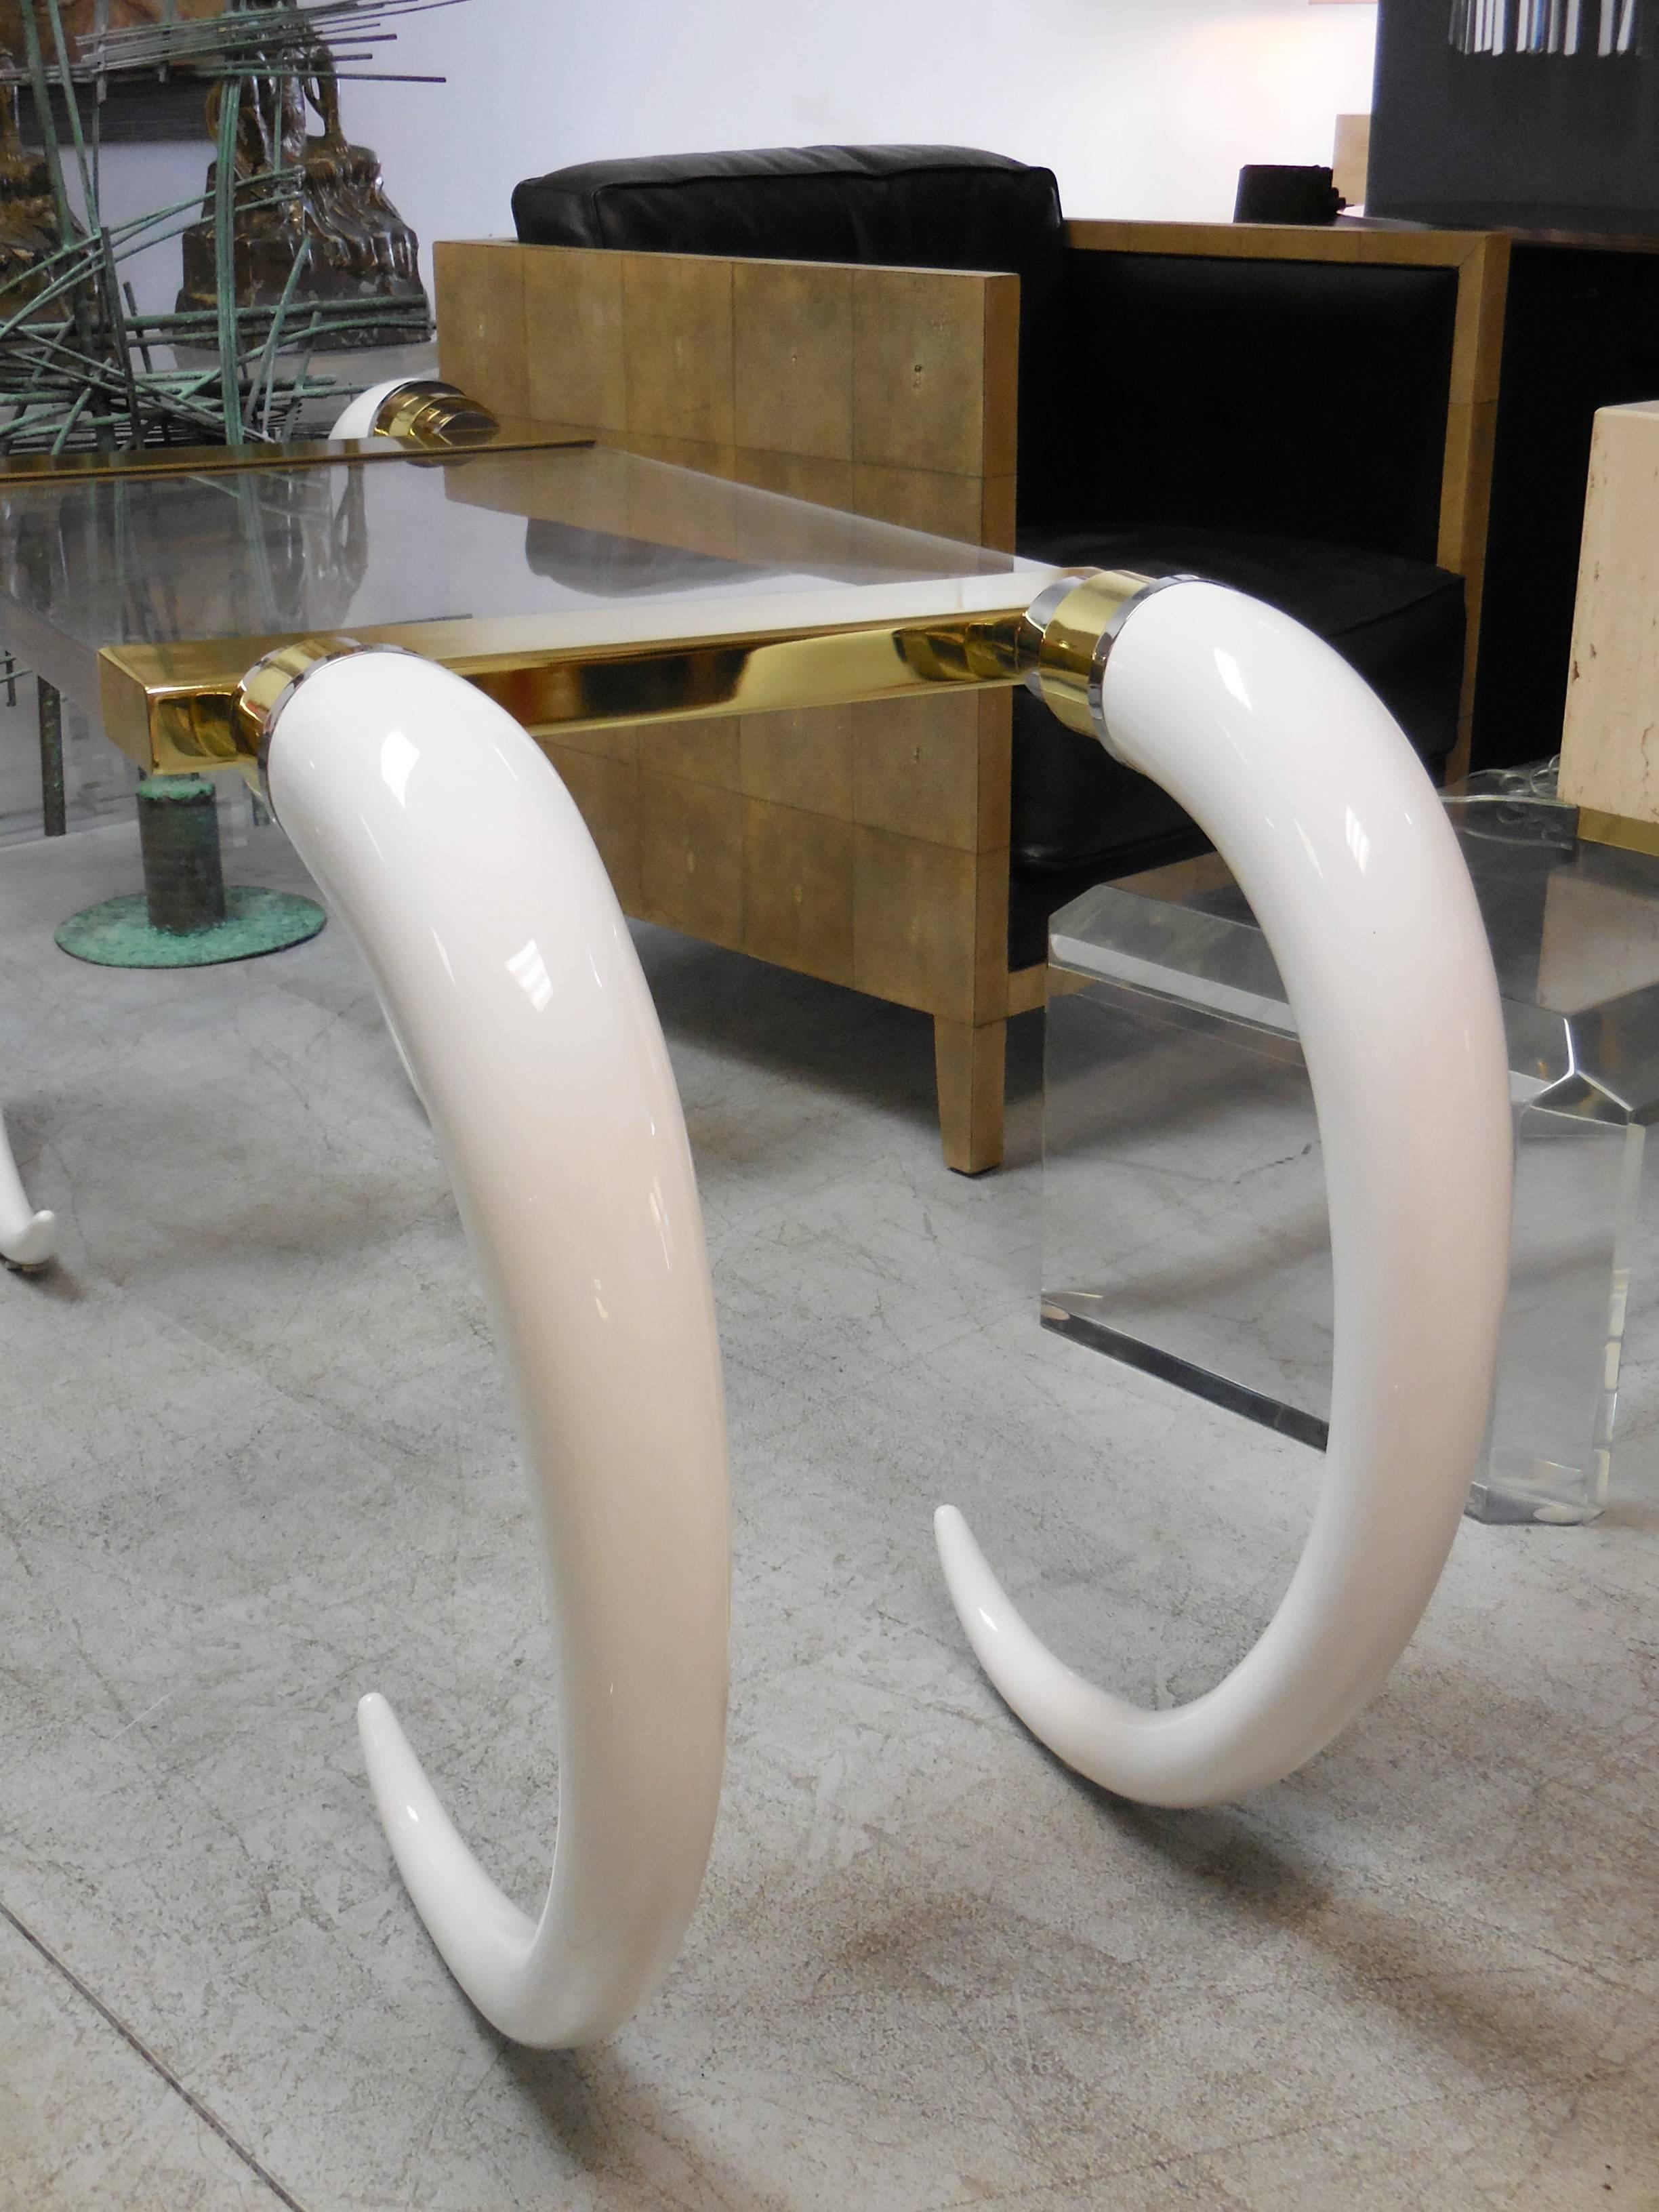 A wonderful brass and faux elephant tusks desk. With thick Lucite tabletop makes the tusks appear to float to either side, circa 1970s.